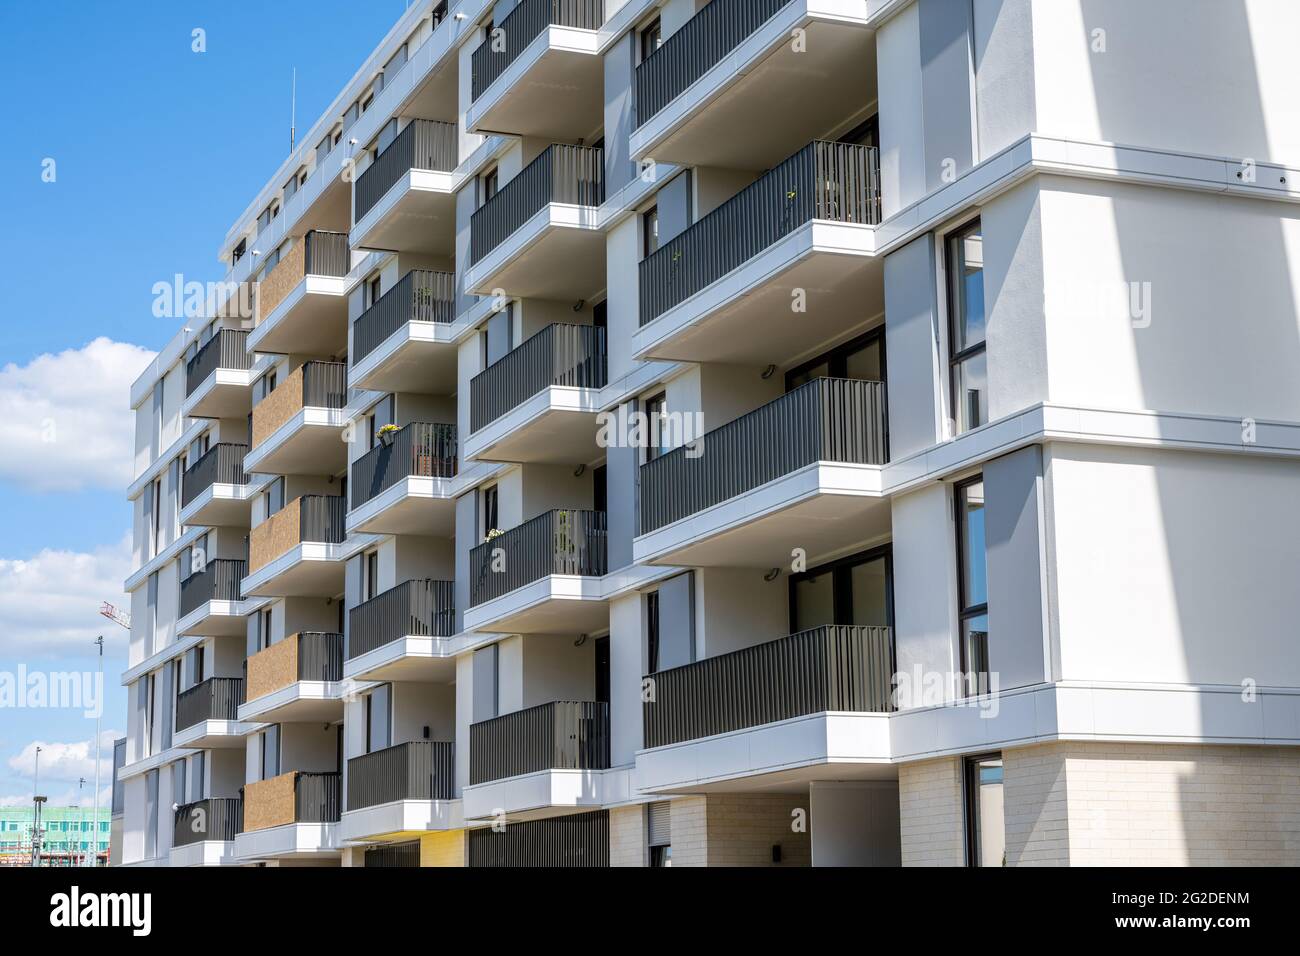 Modern apartment building with many balconies seen in Berlin, Germany Stock Photo